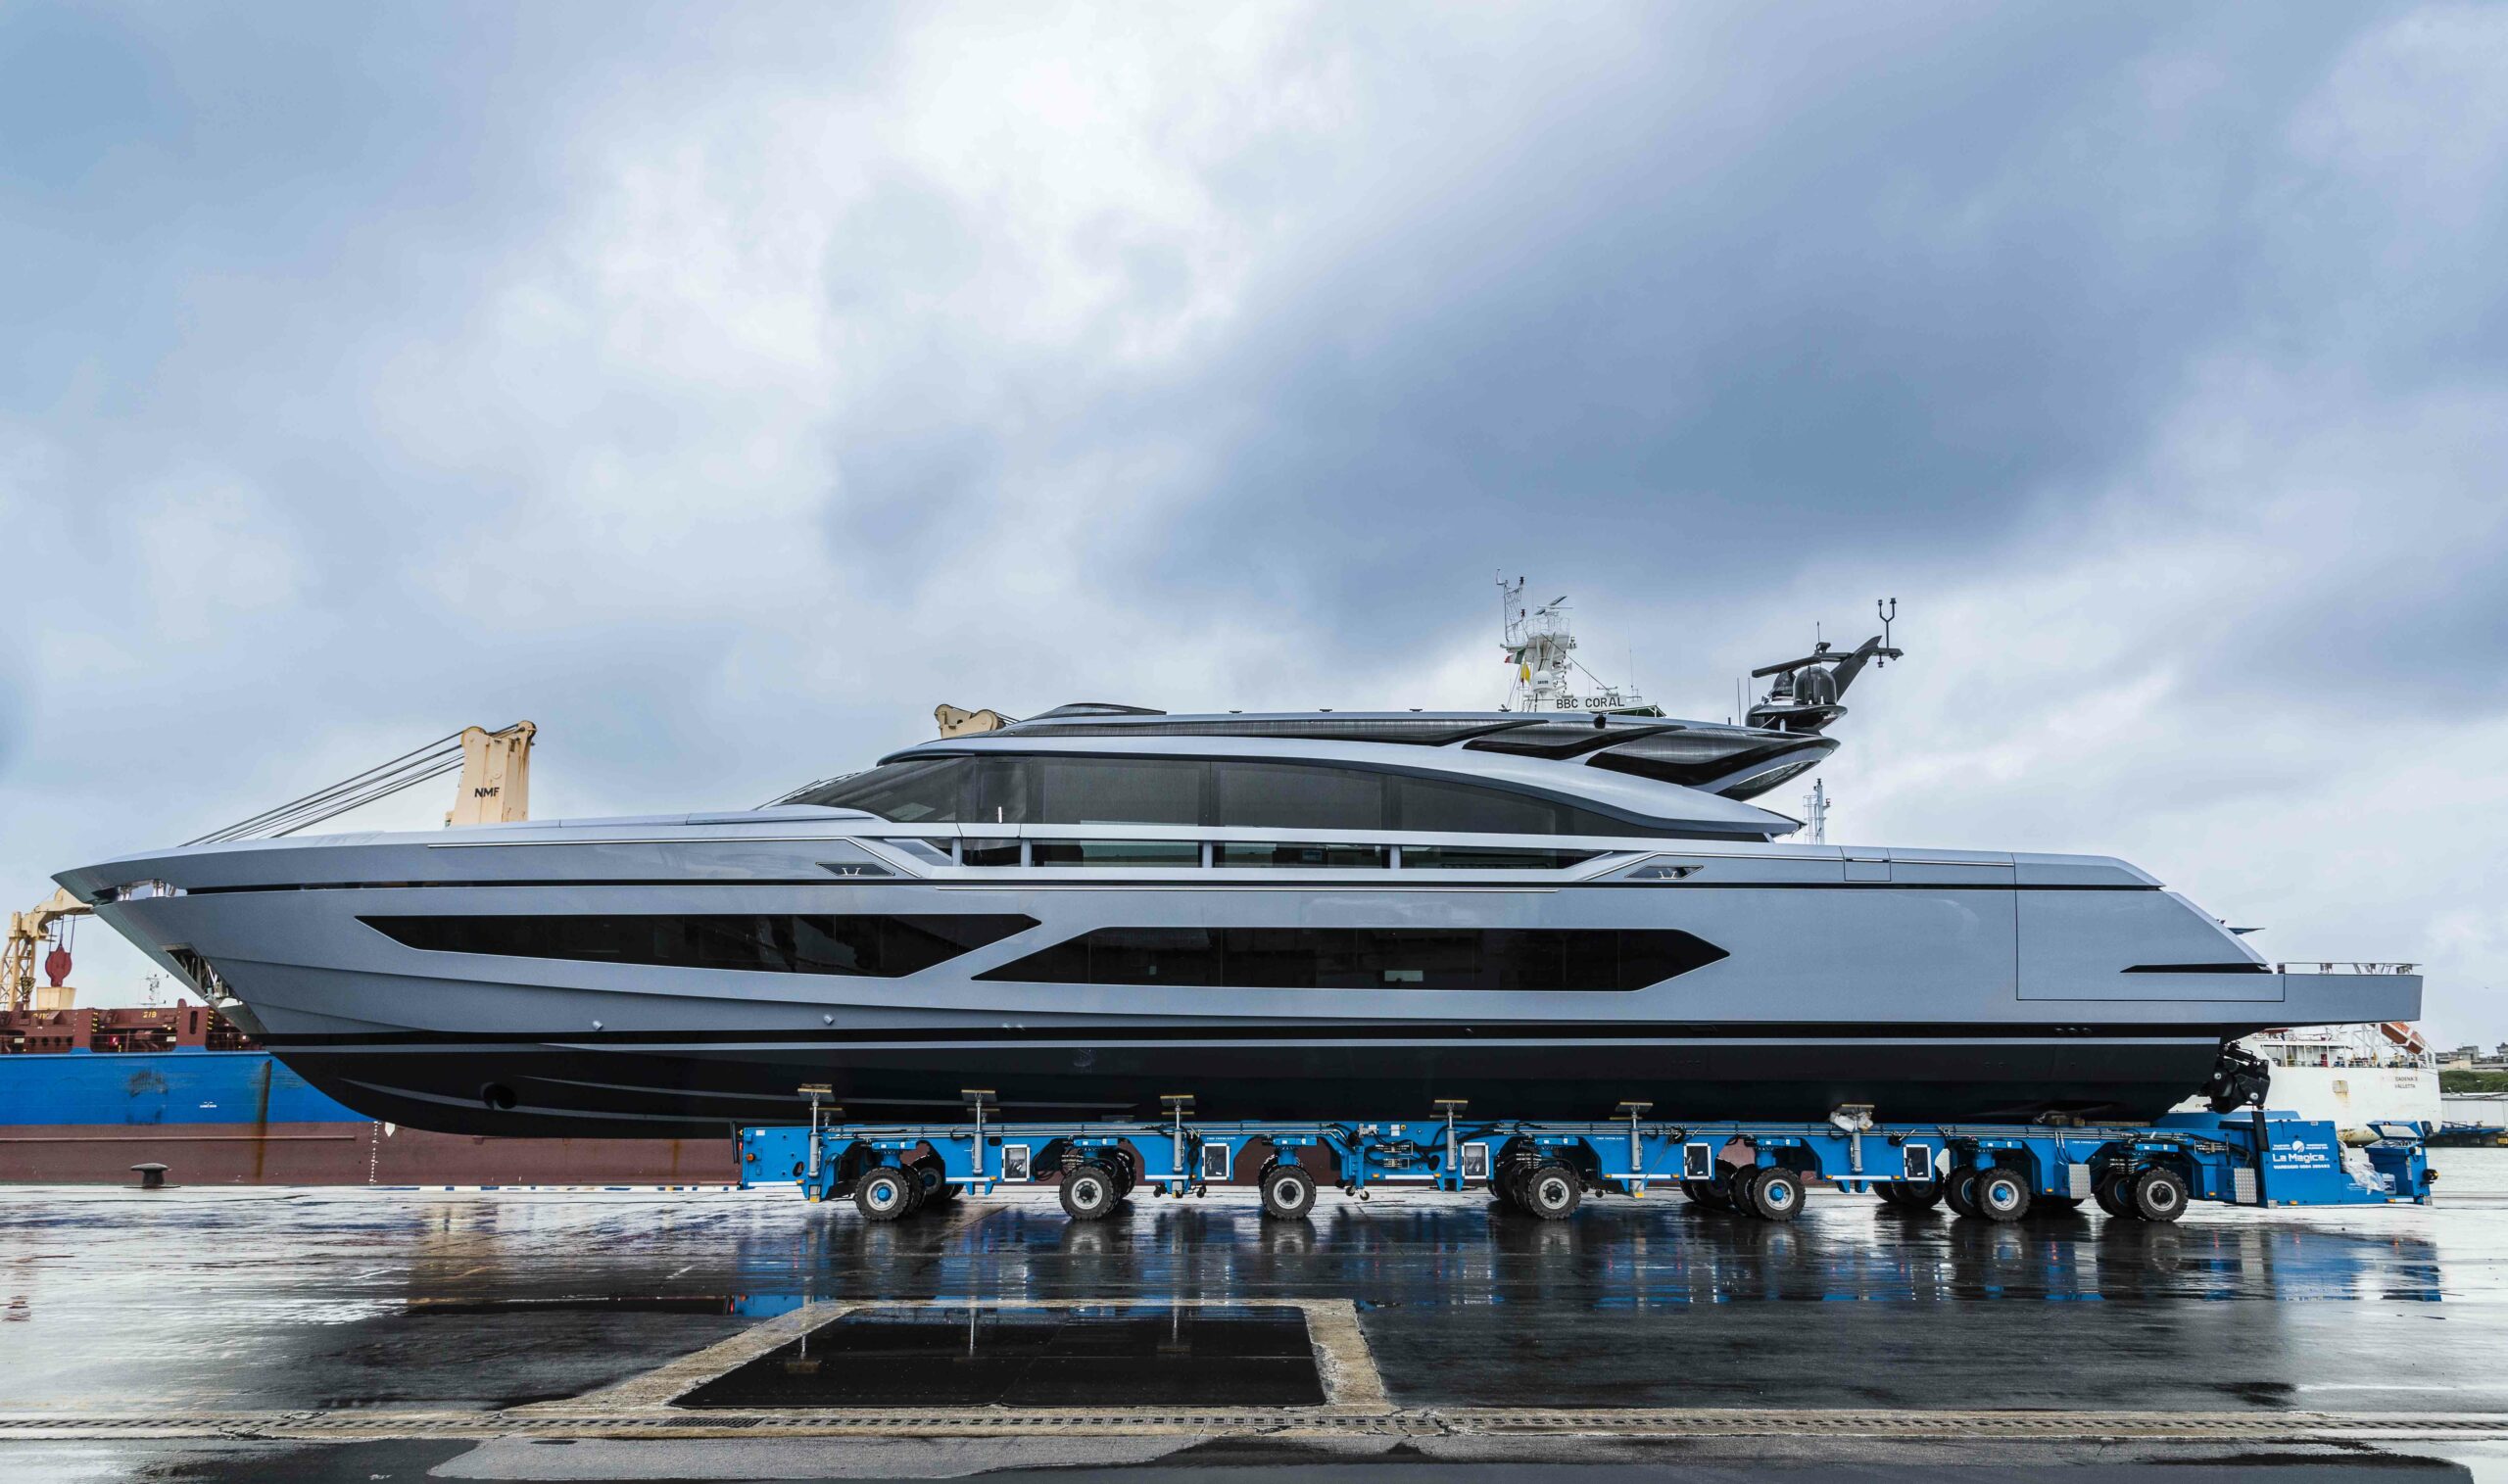 The new Ab120 has been launched by Ab Yachts